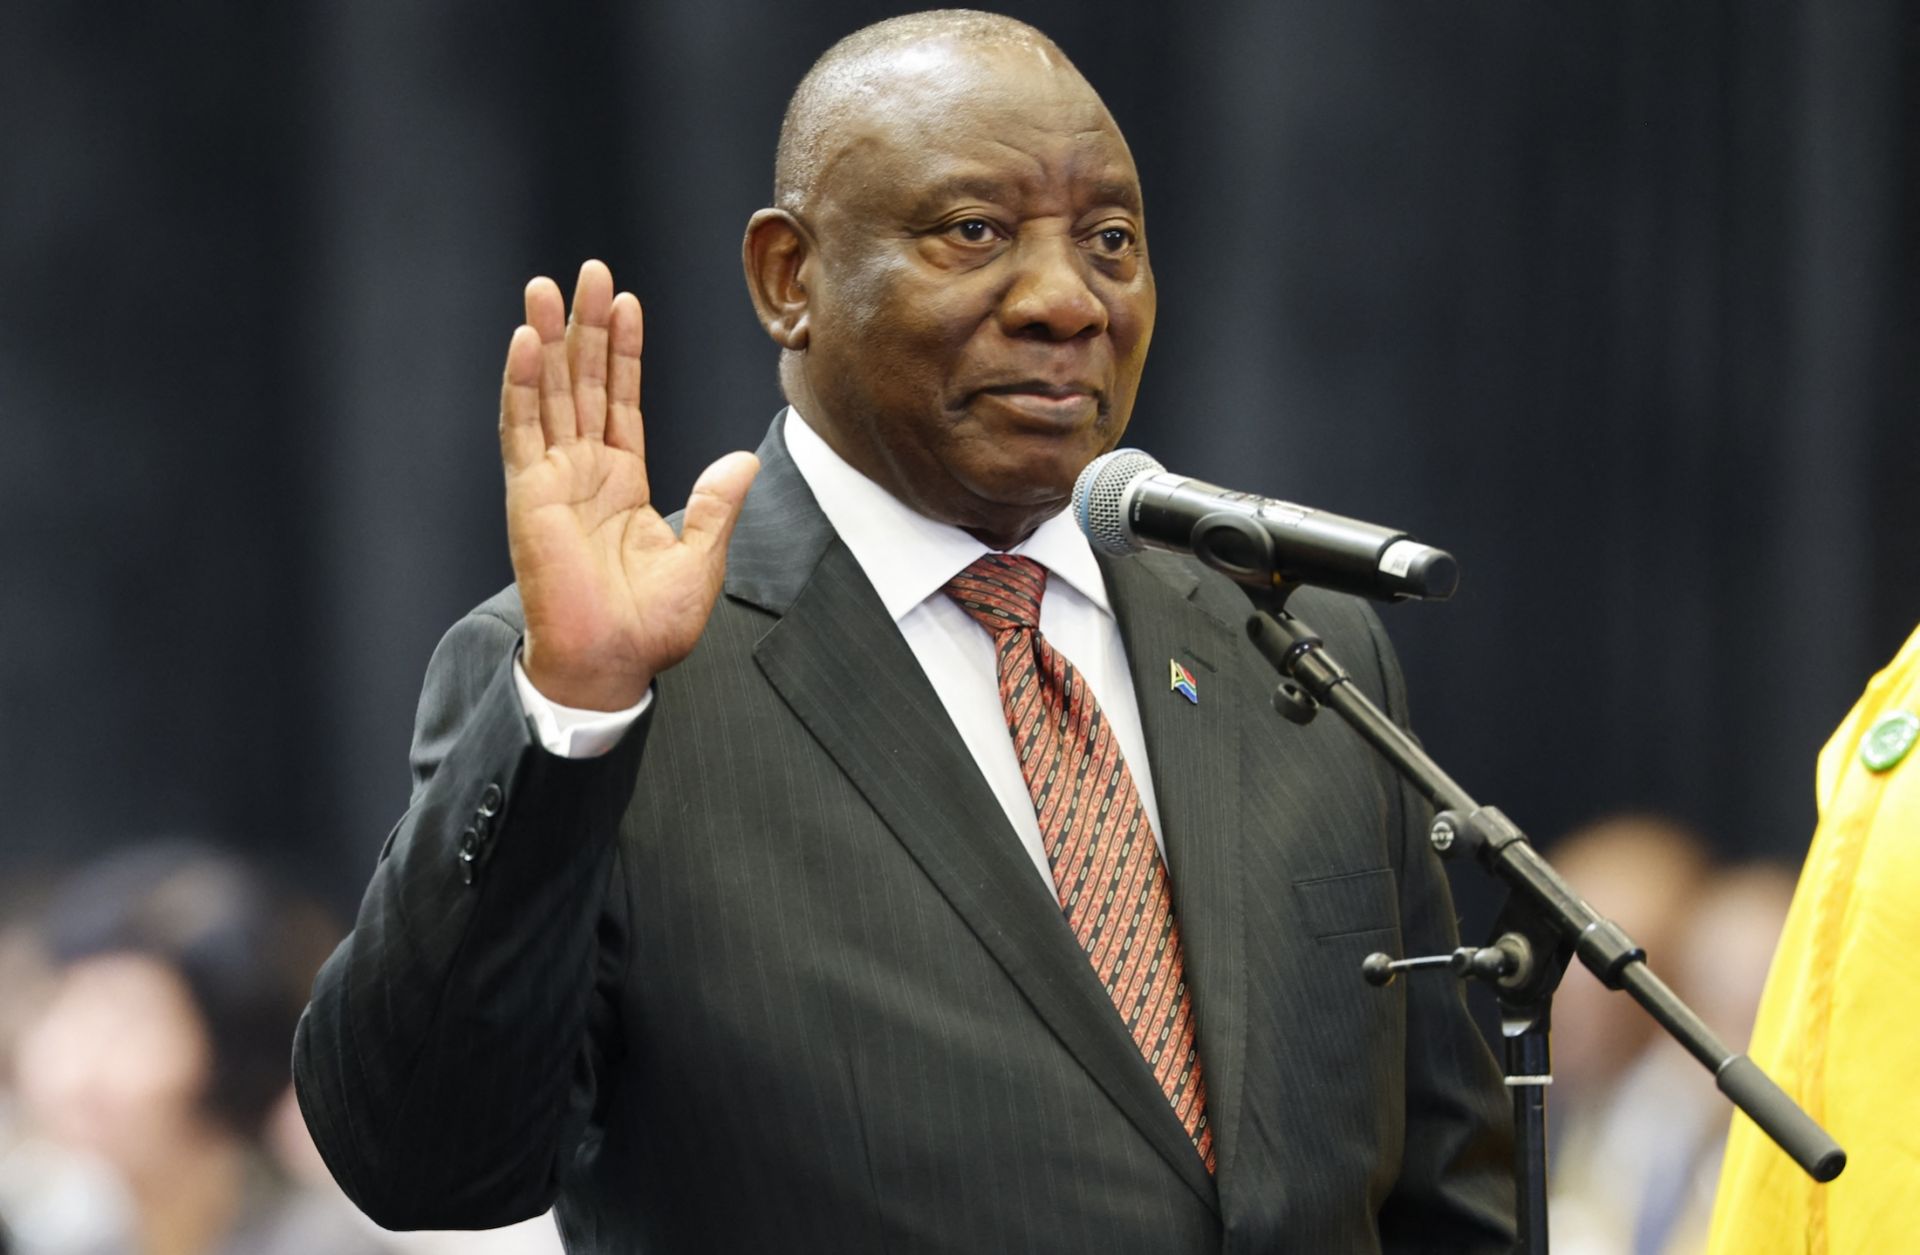 President Cyril Ramaphosa is sworn in as member of parliament during the first sitting of the new South African parliament on June 14 in Cape Town, South Africa.